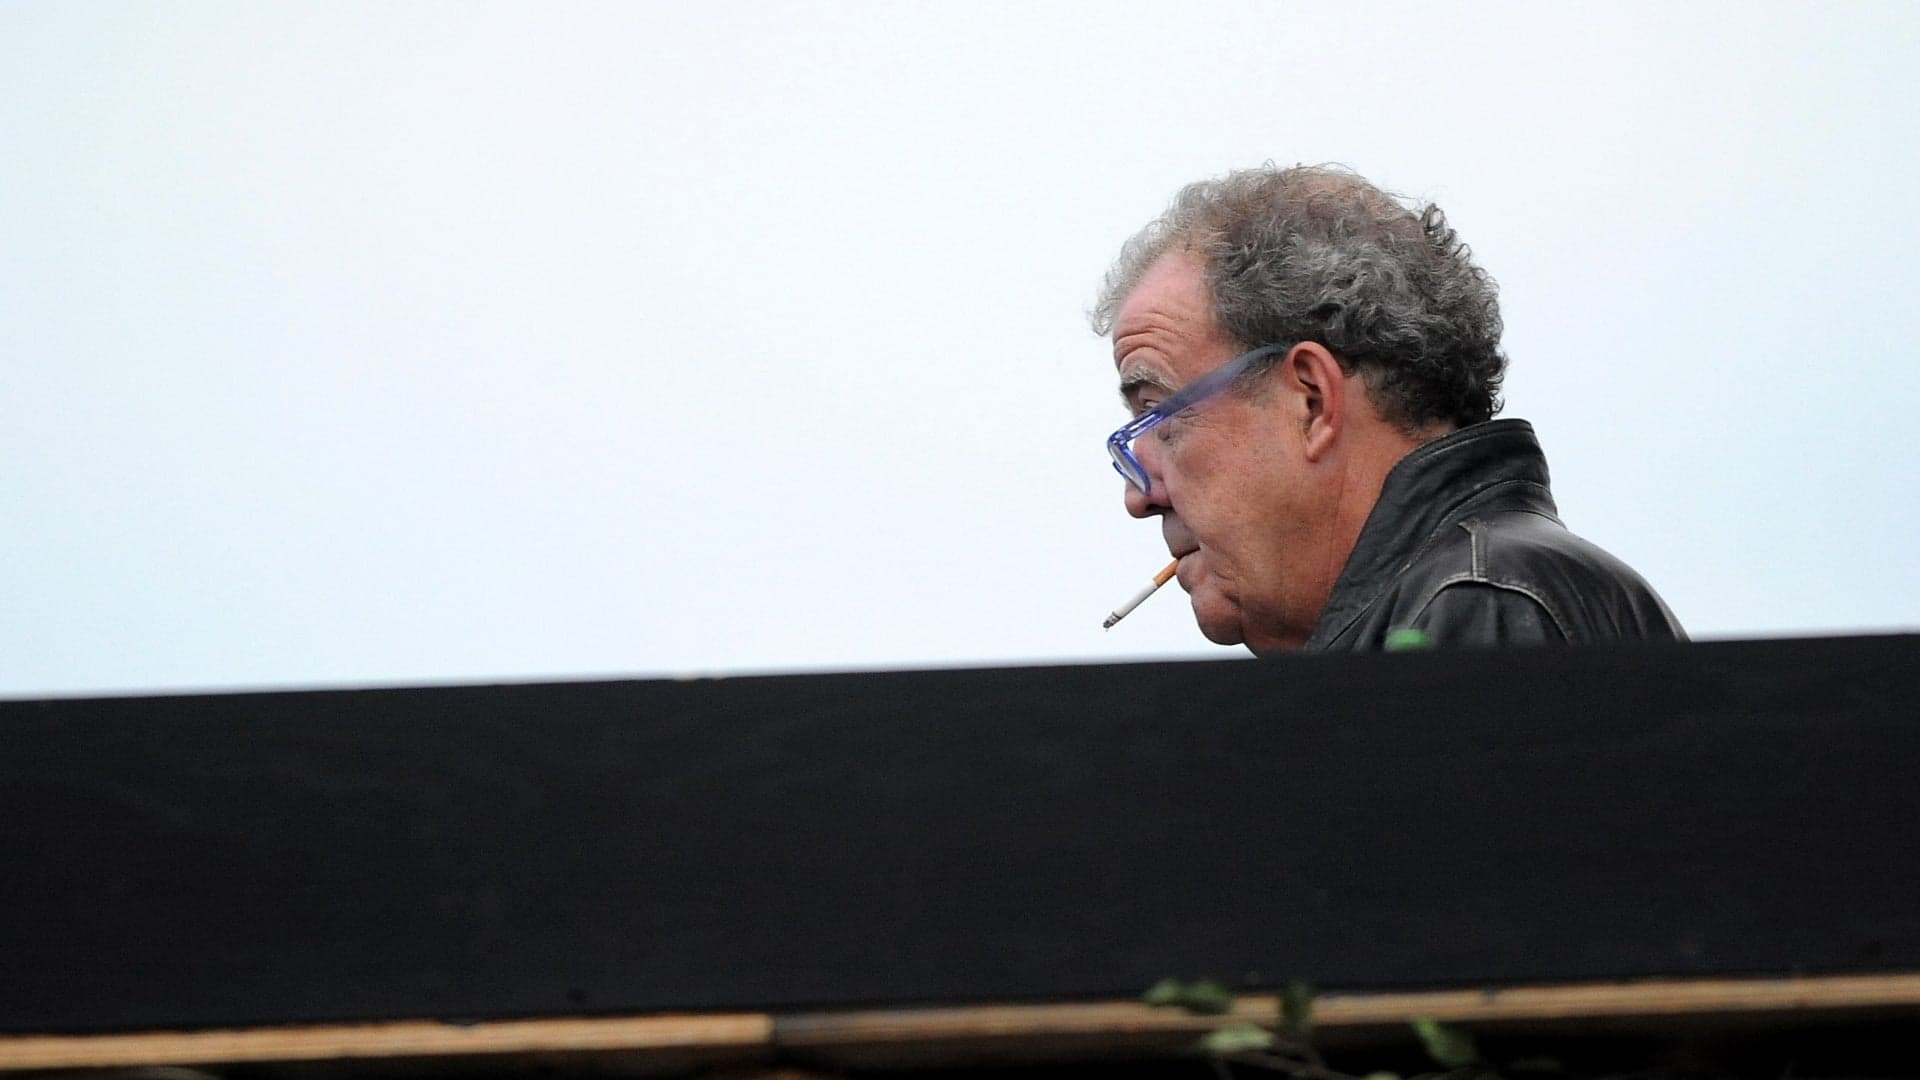 Jeremy Clarkson Caught Liking Porn on Twitter But Claims It Totally Wasn’t Him